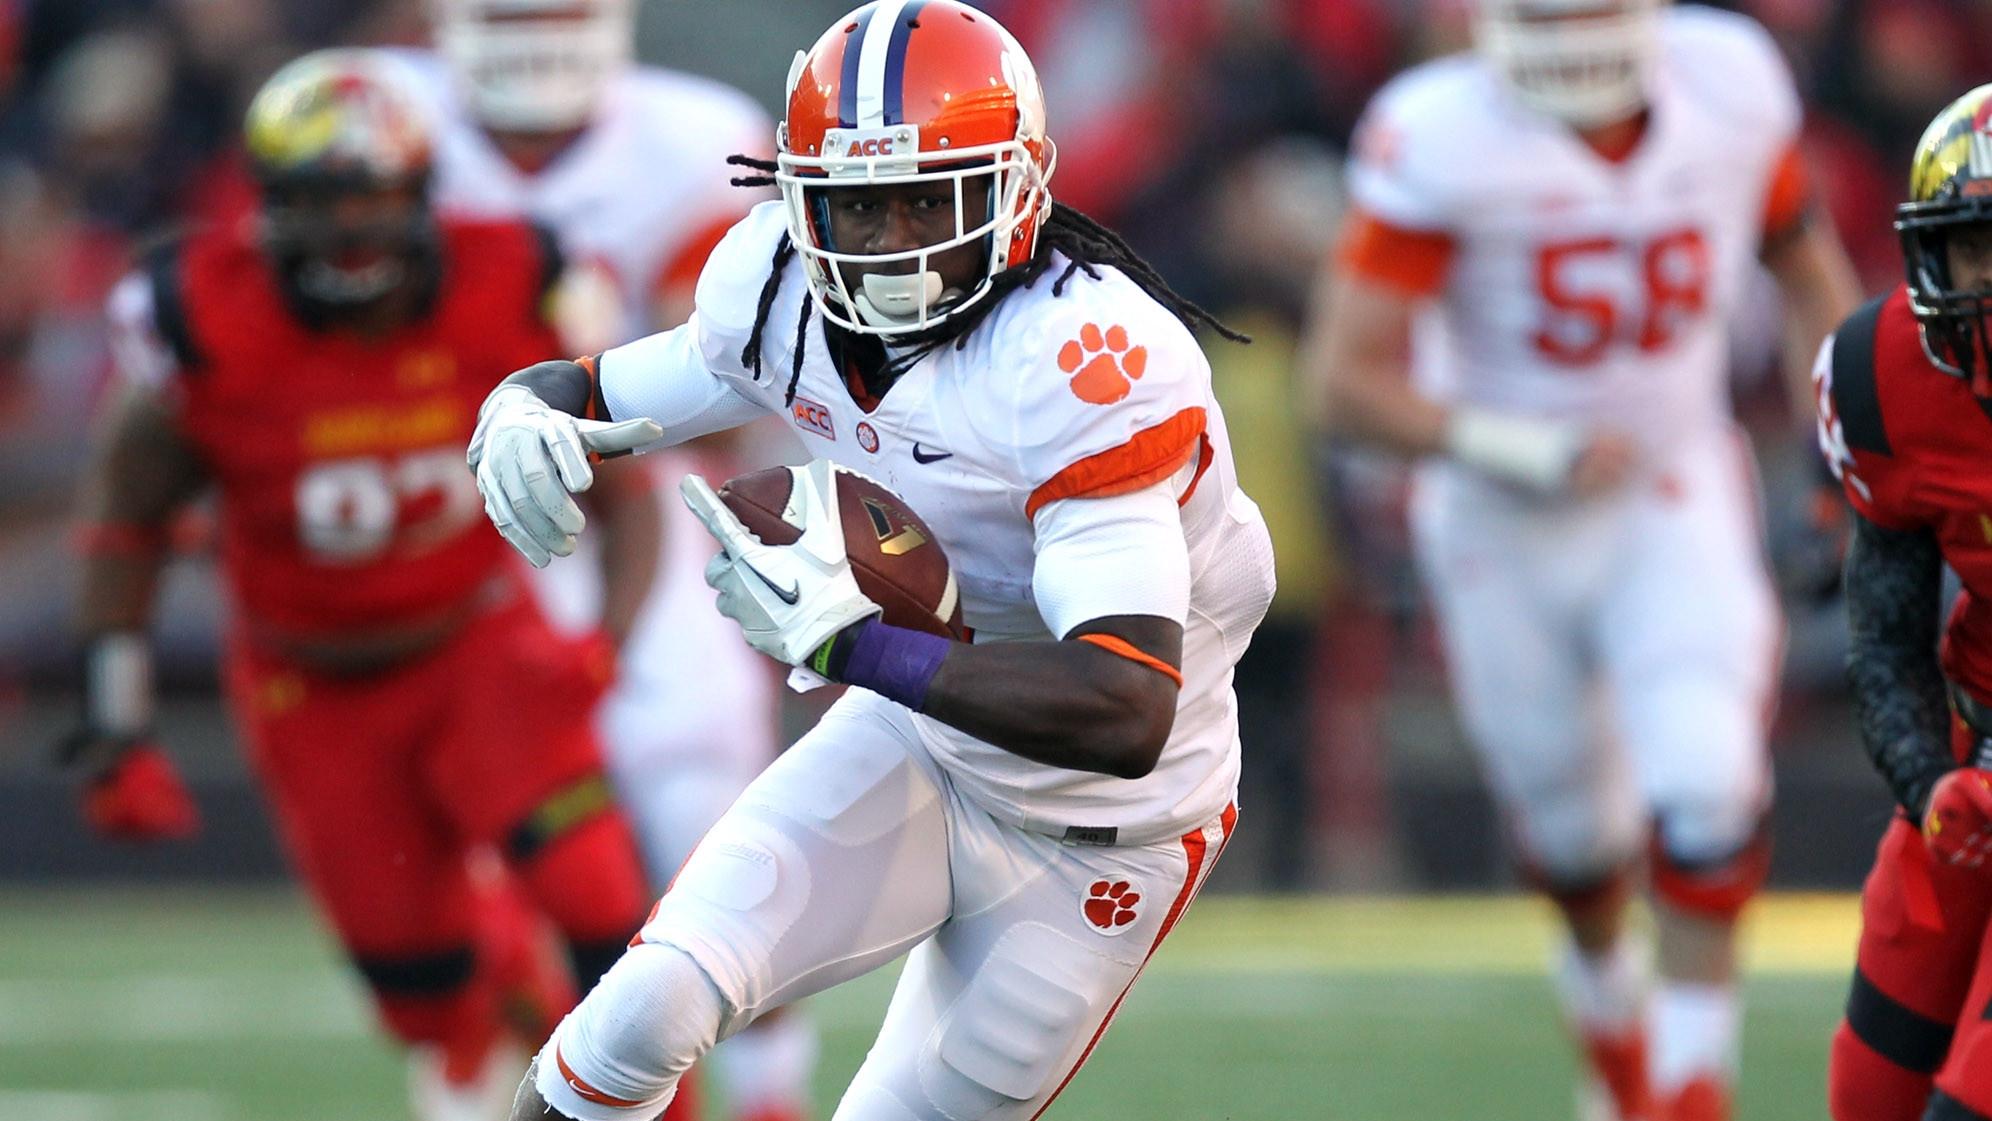 AgSouth Homegrown Athlete of the Week – Sammy Watkins